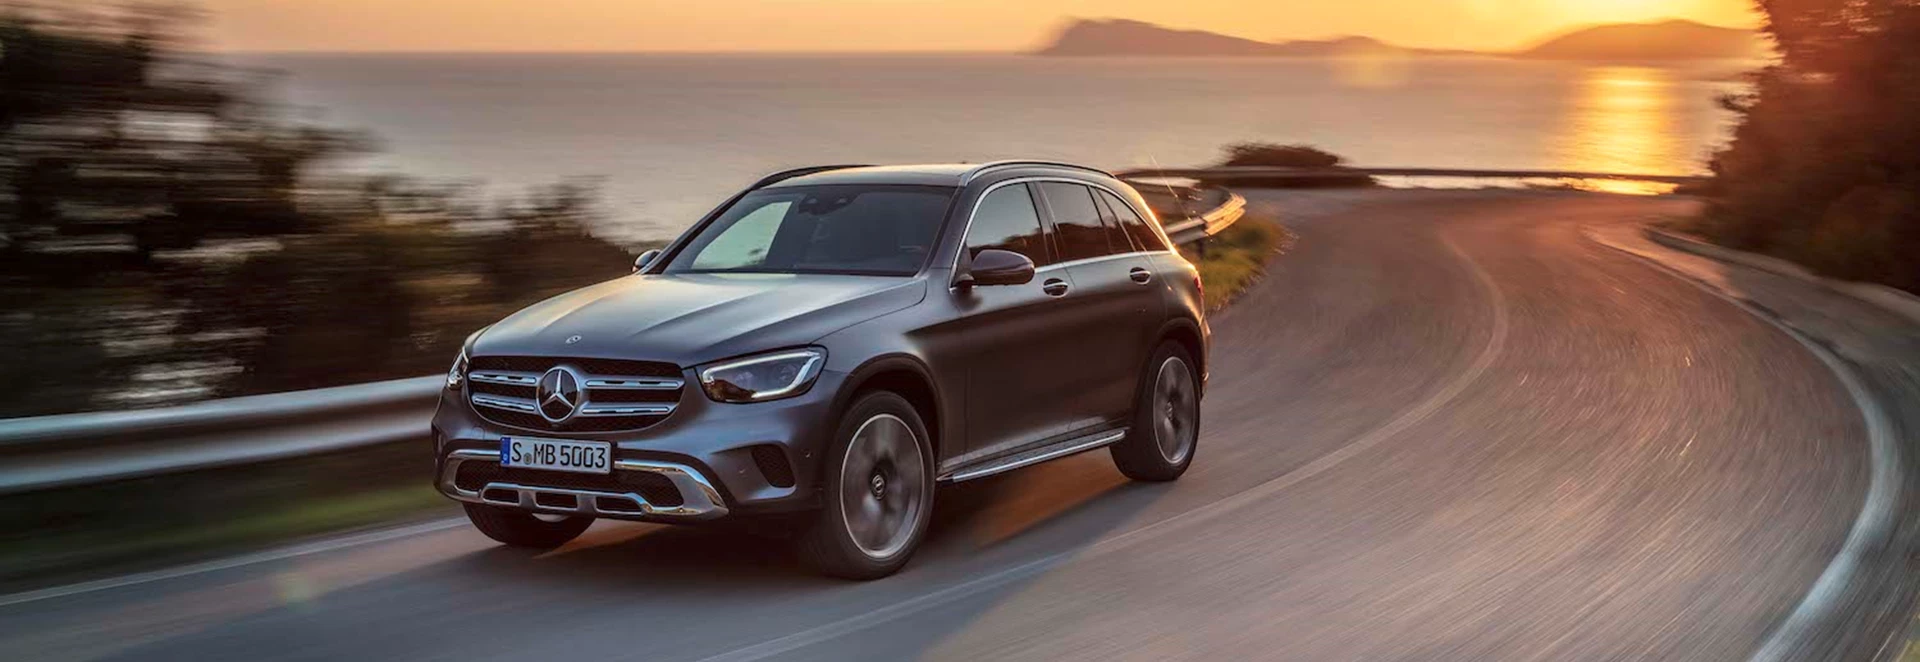 Facelifted Mercedes-Benz GLC revealed 